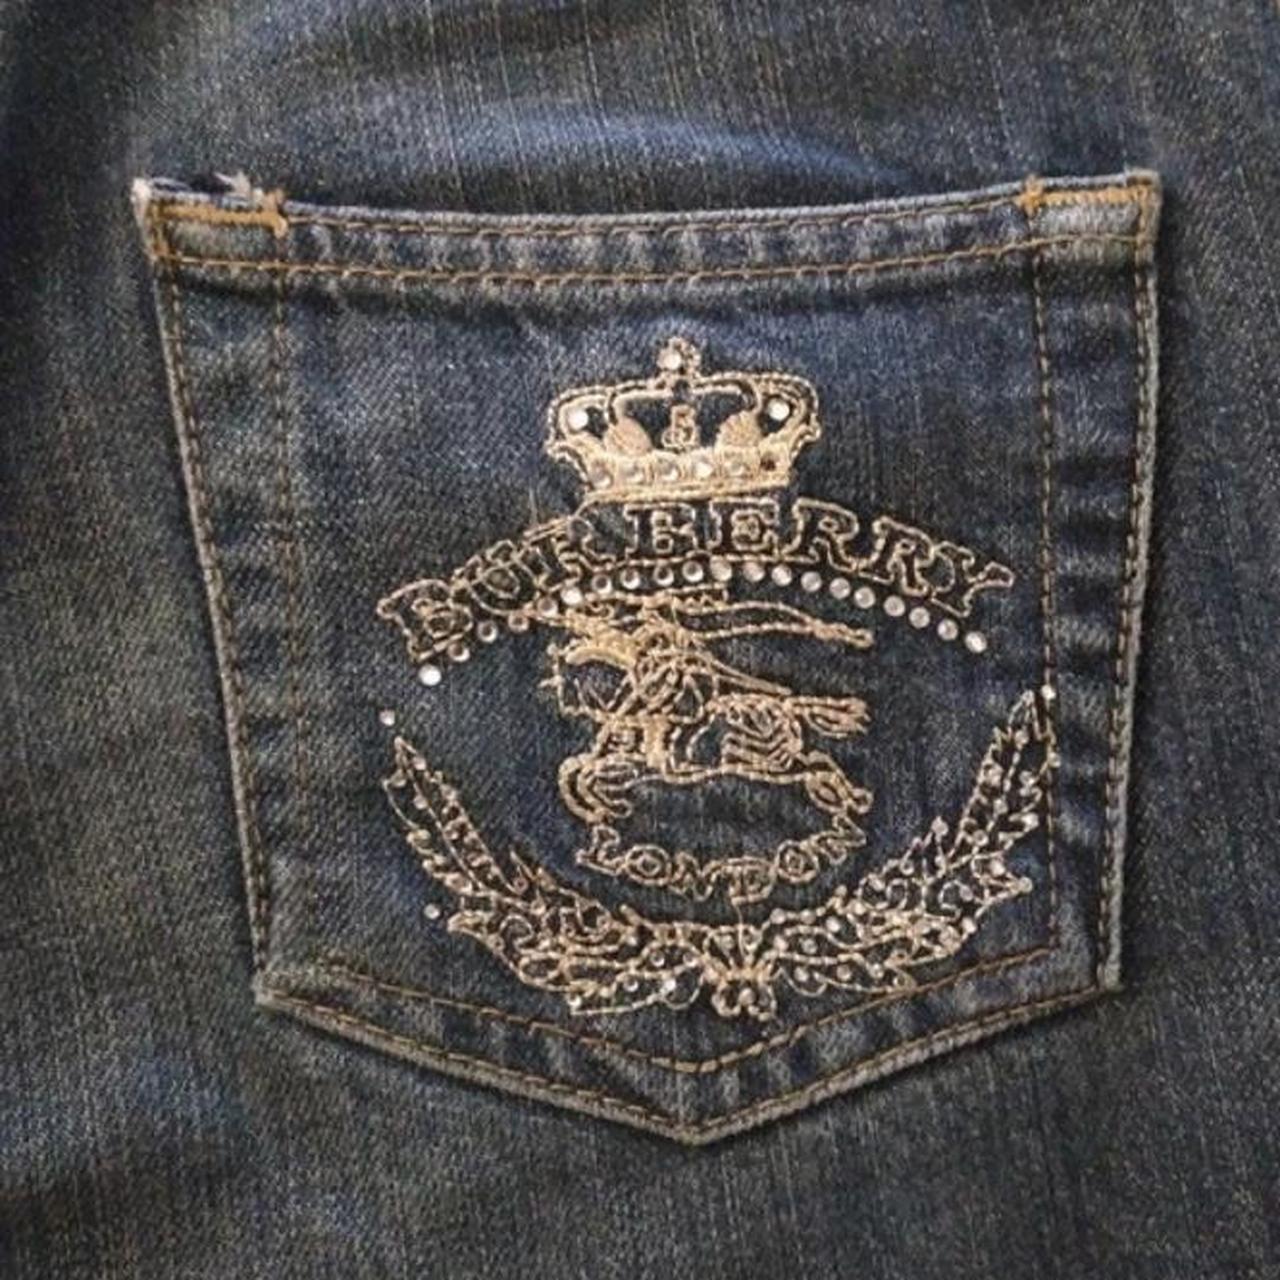 Burberry 00s jeans, with gold embroidered logo and... - Depop